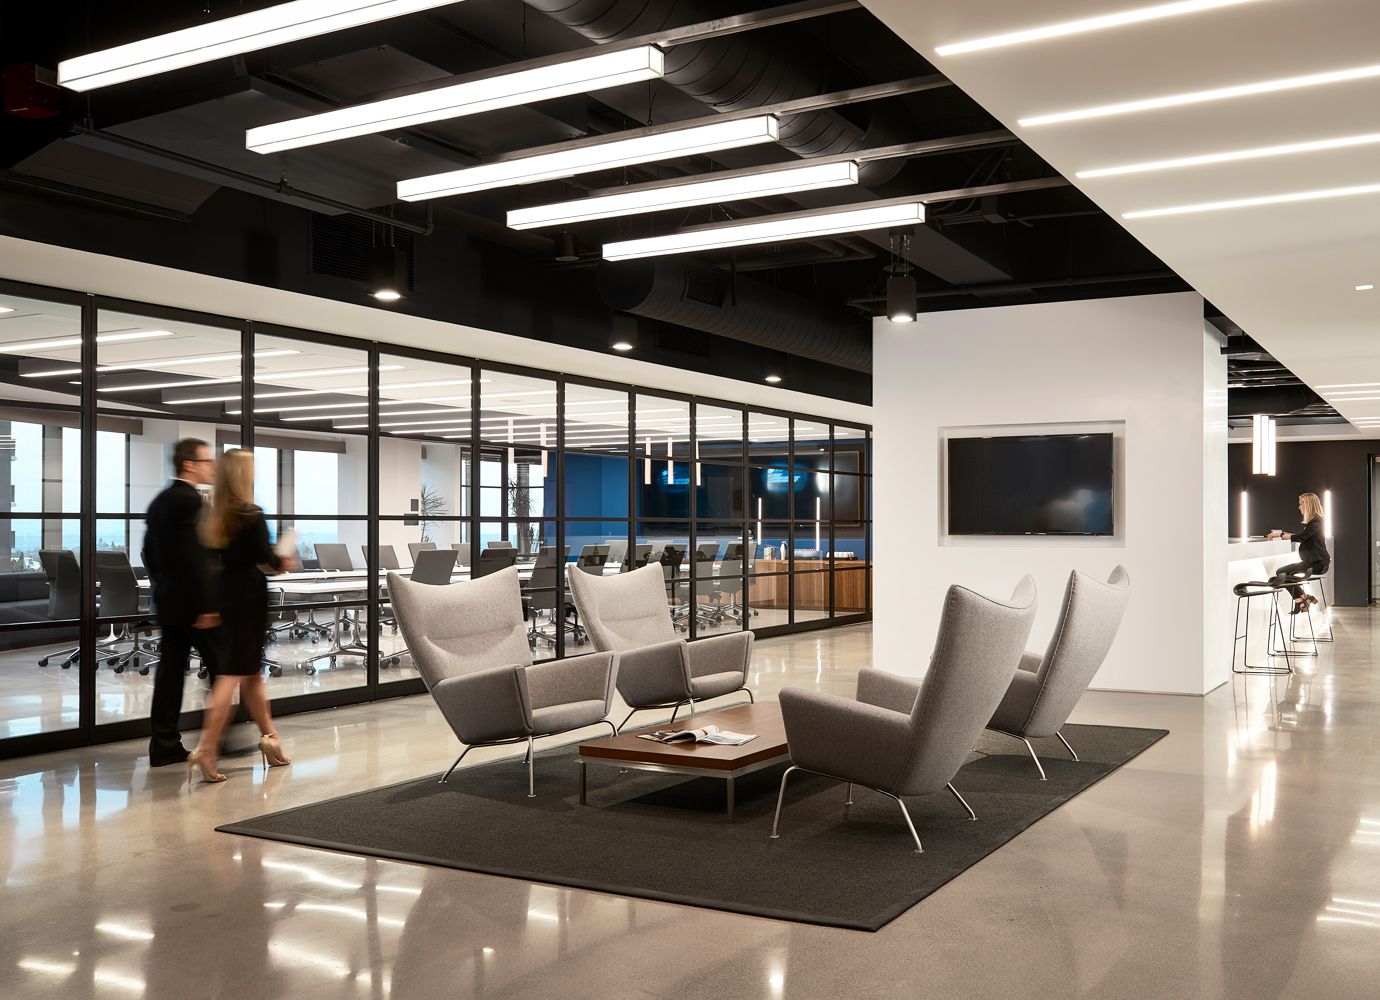 Akin Gump Office | Architect: Gensler | Swing Doors, Fixed Panels, Operable Walls | Reconfigurable Open Space Closed with Sliding Partitions